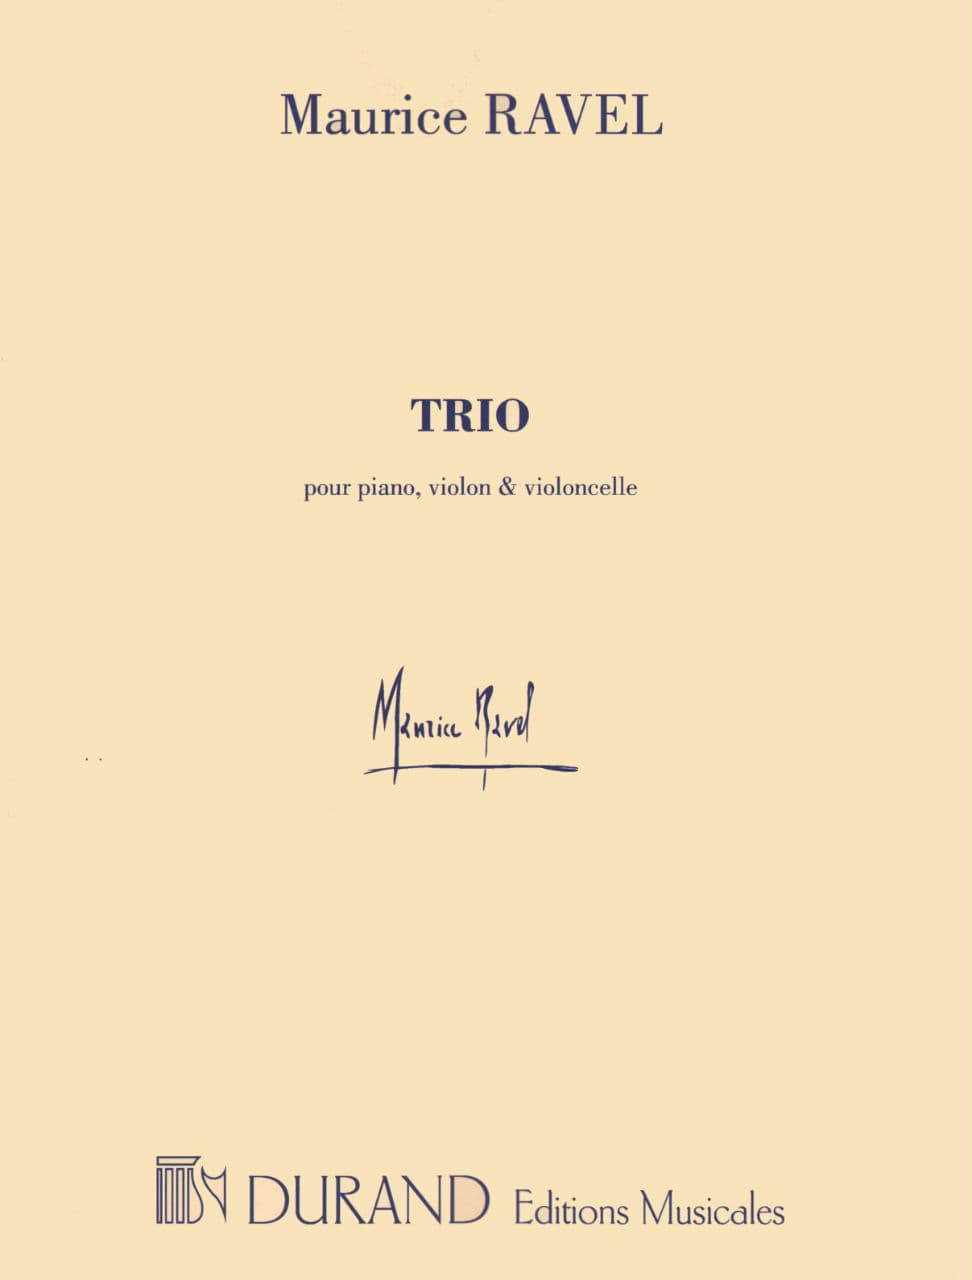 Ravel, Maurice - Piano Trio (1914) For Violin Cello and Piano Published by Editions Durand